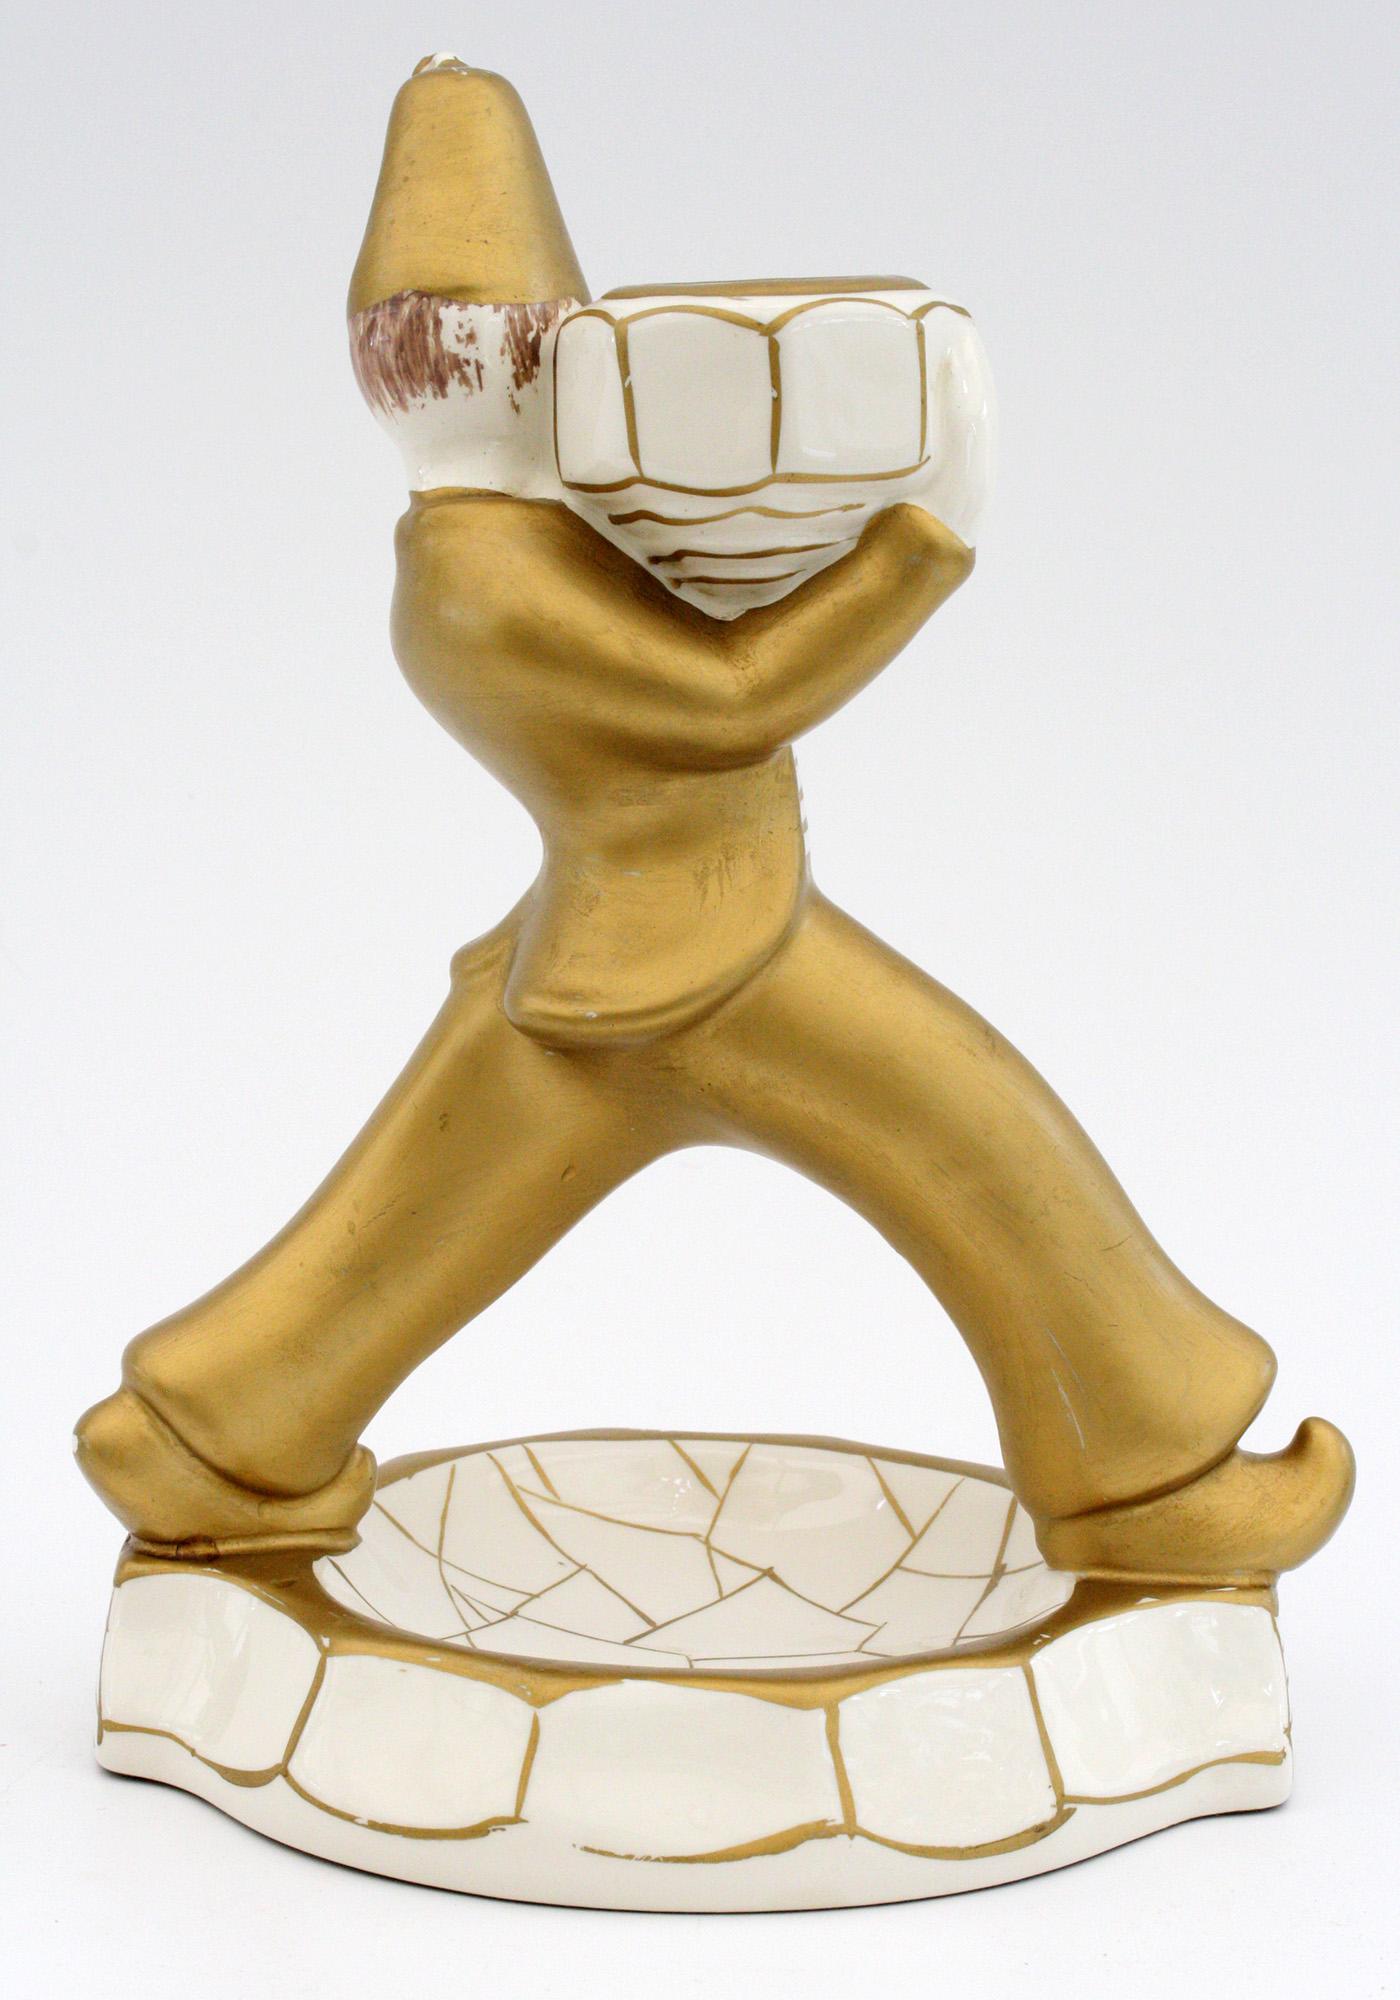 A charming French attributed Art Deco pottery figural candlestick portraying a novelty figure mounted on a circular base holding a large vessel on his shoulder which forms the candleholder. The figure is made in a cream colored pottery and decorated